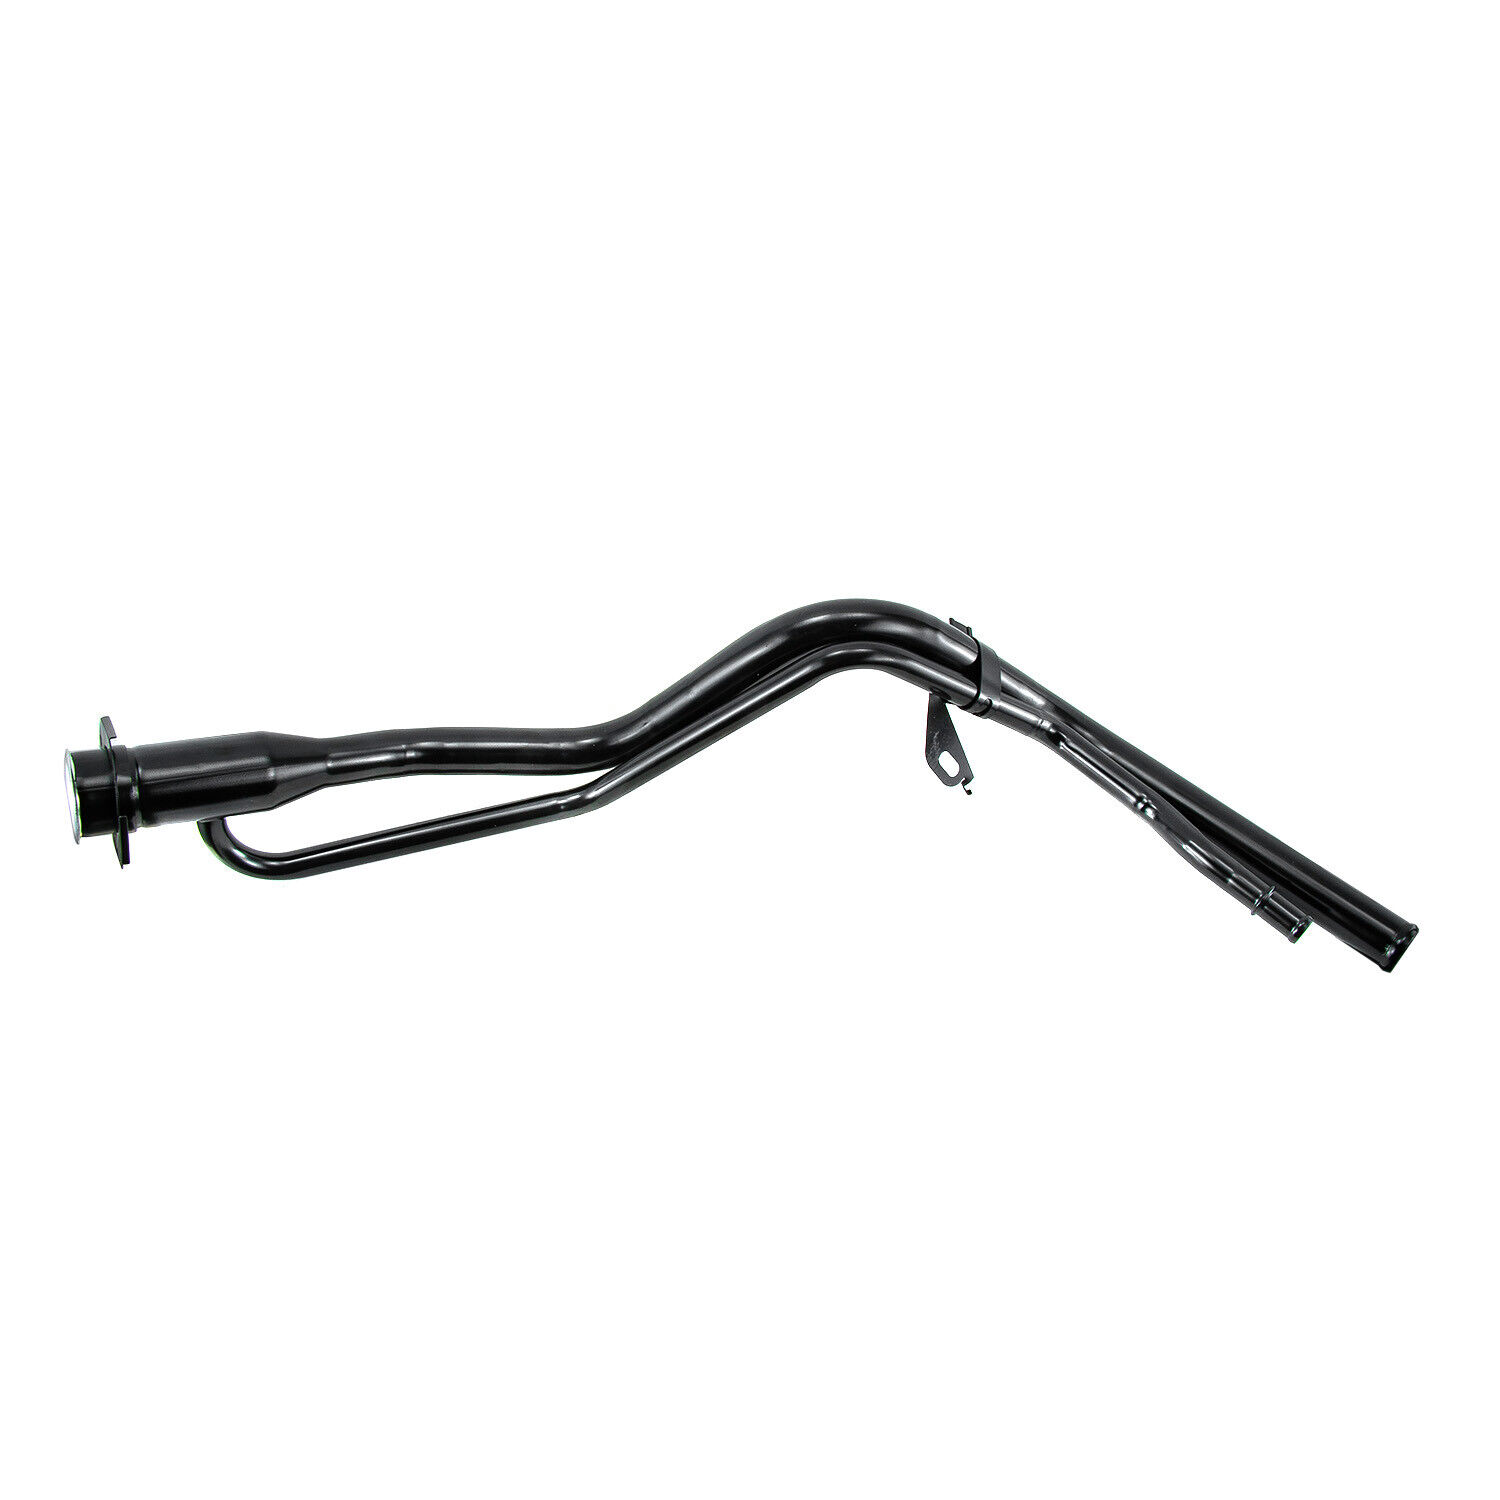 Gas Fuel Tank Filler Neck Pipe Direct for 1994-1997 1995 Cadillac Deville Black